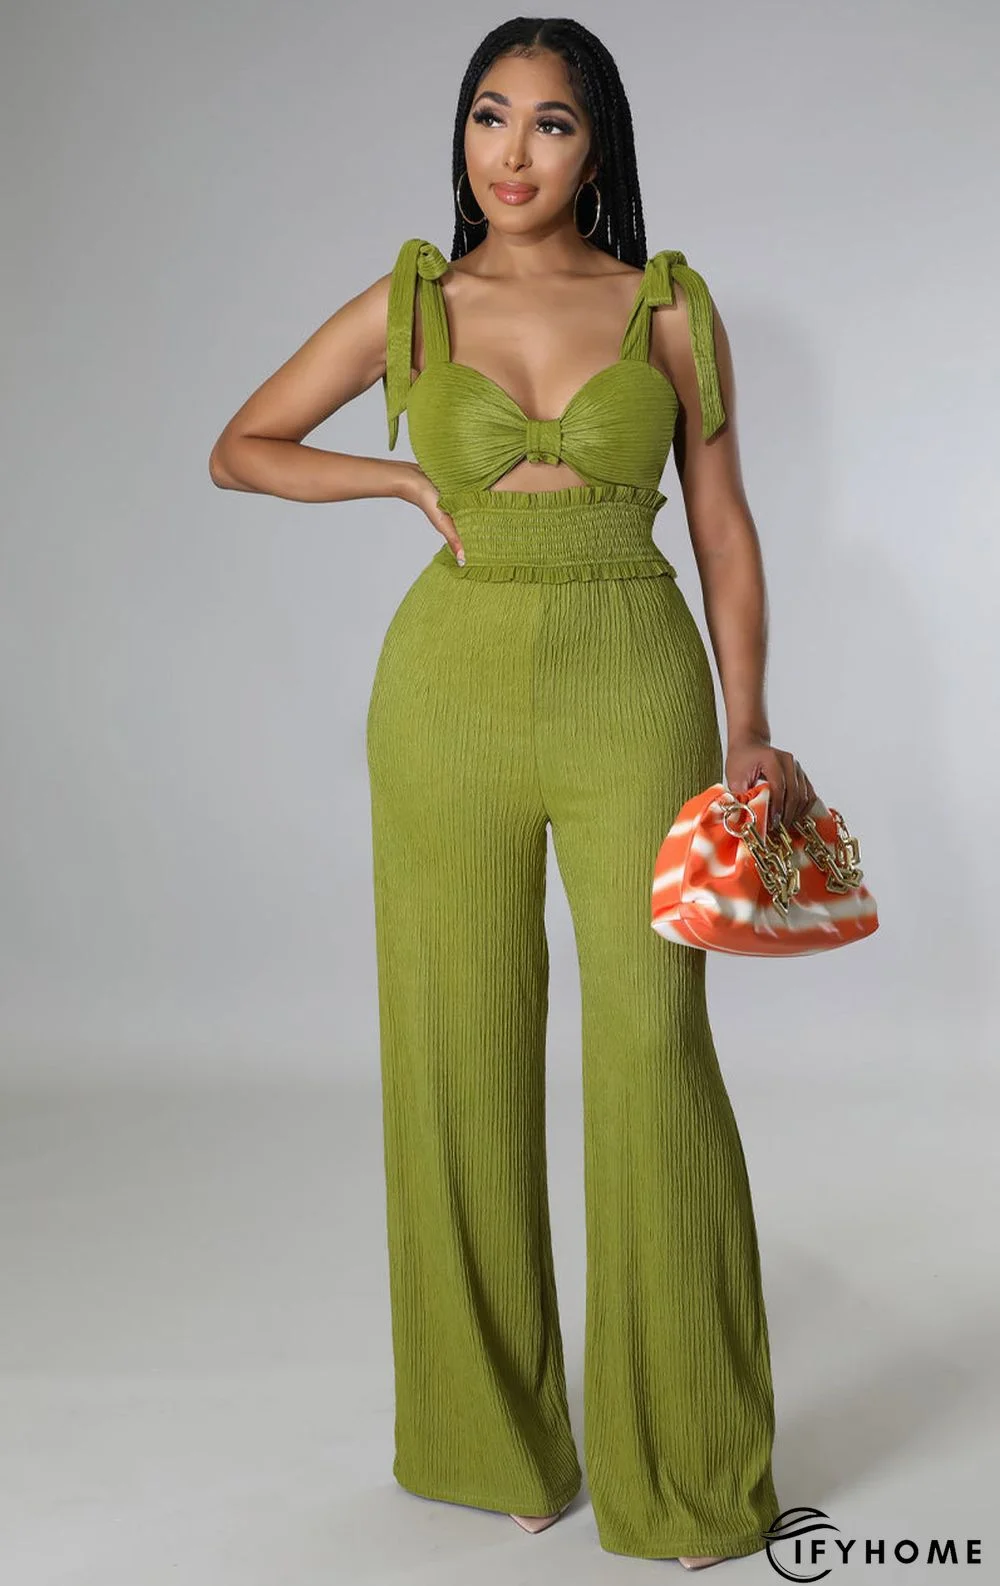 Summer Casual Fashion Sleeveless Tube Top New Jumpsuit | IFYHOME